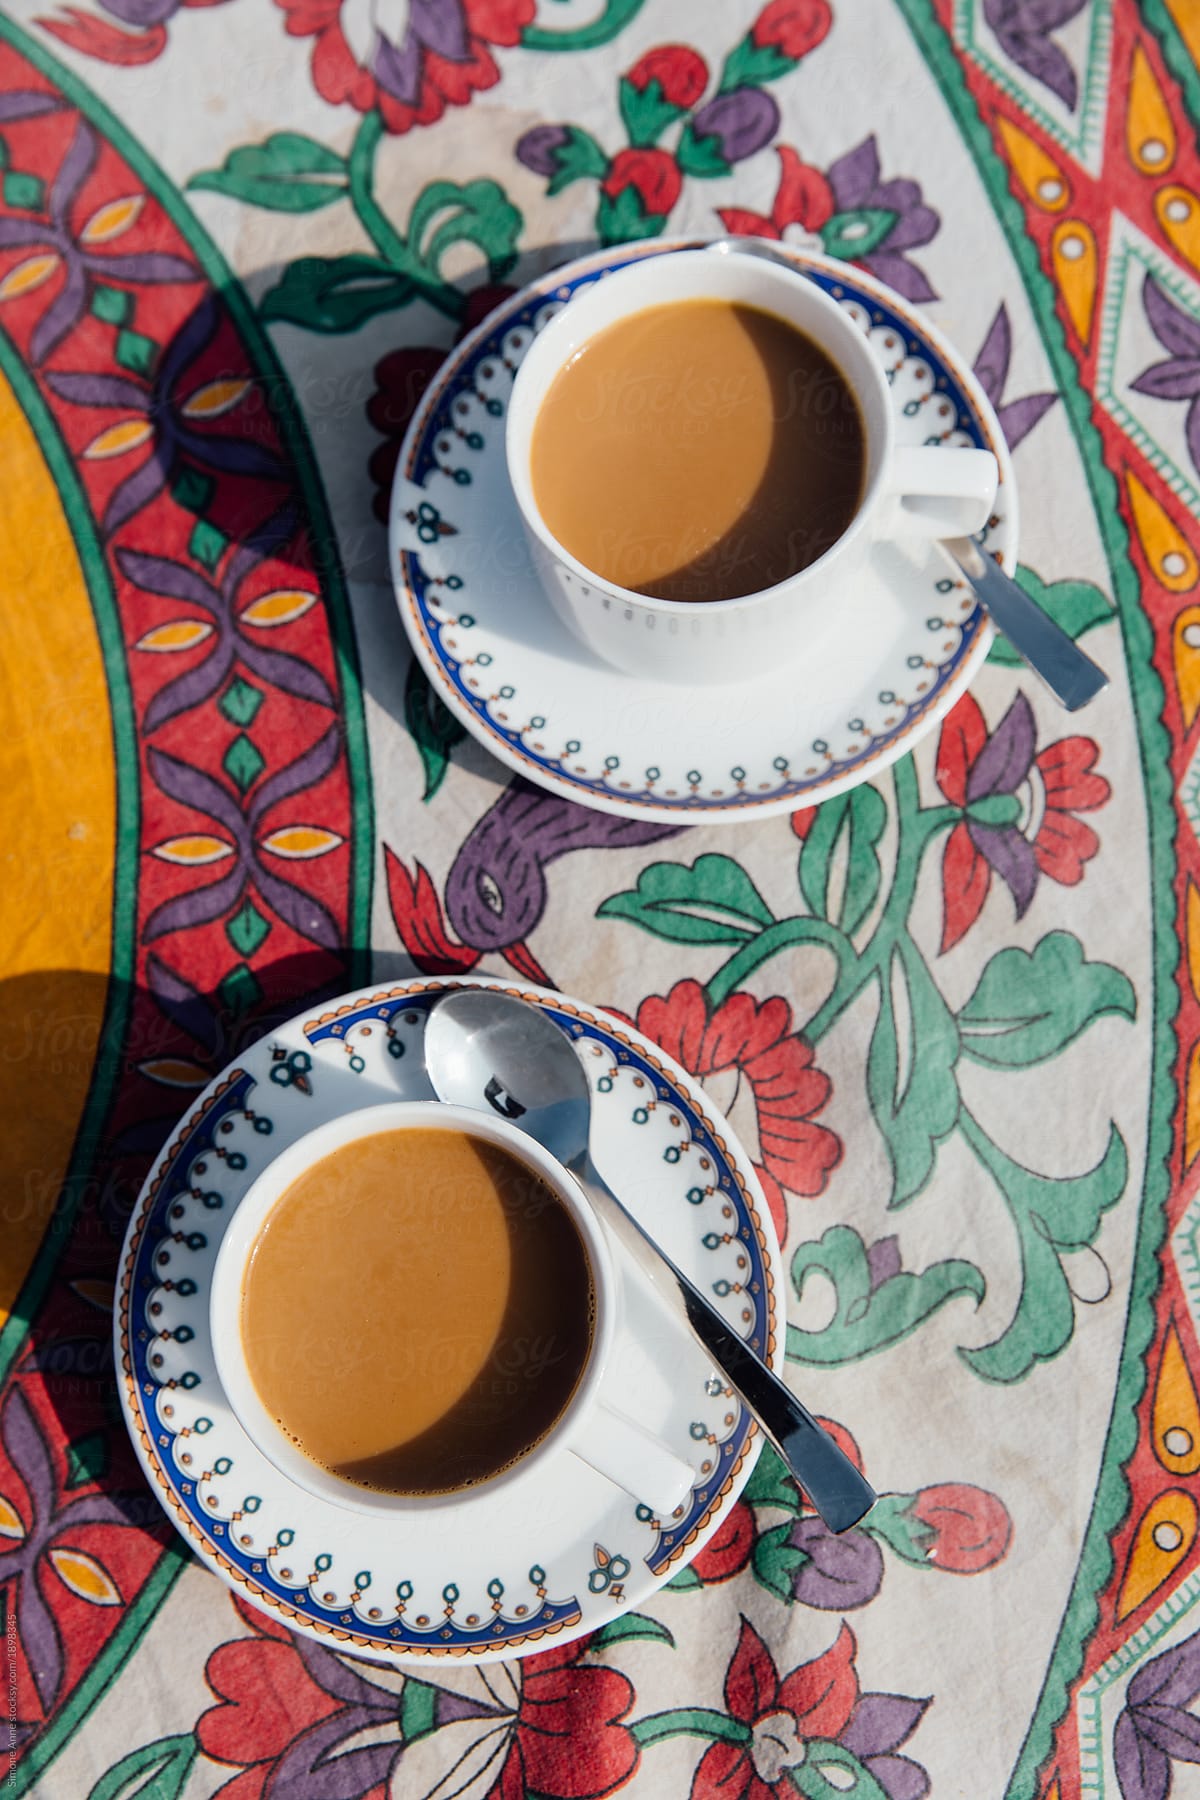 Indian tea in cups with saucers on a colorful tablecloth